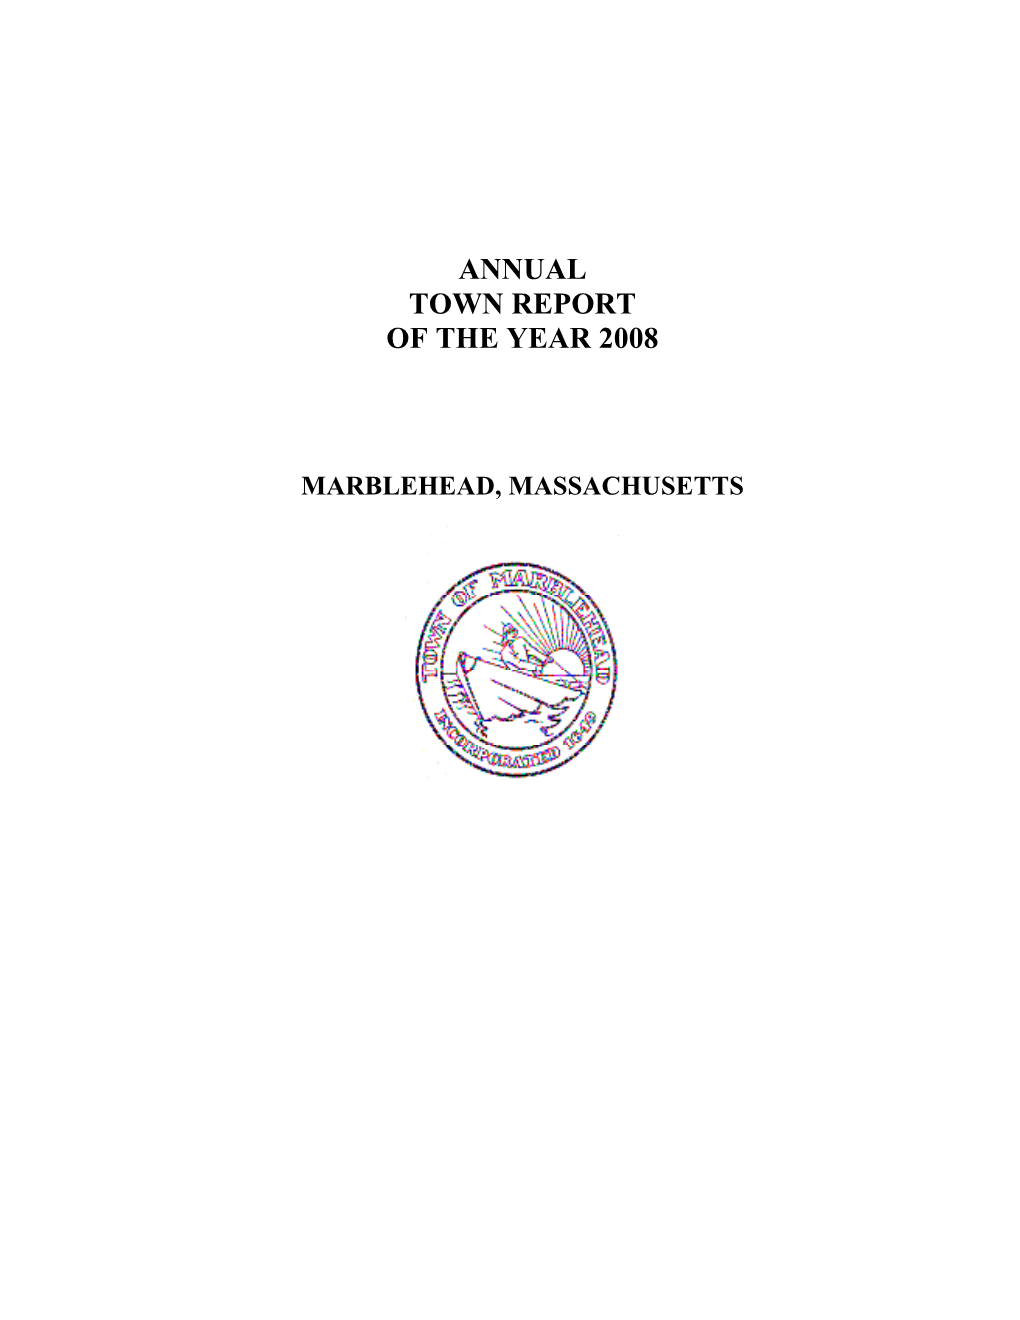 Annual Town Report of the Year 2008